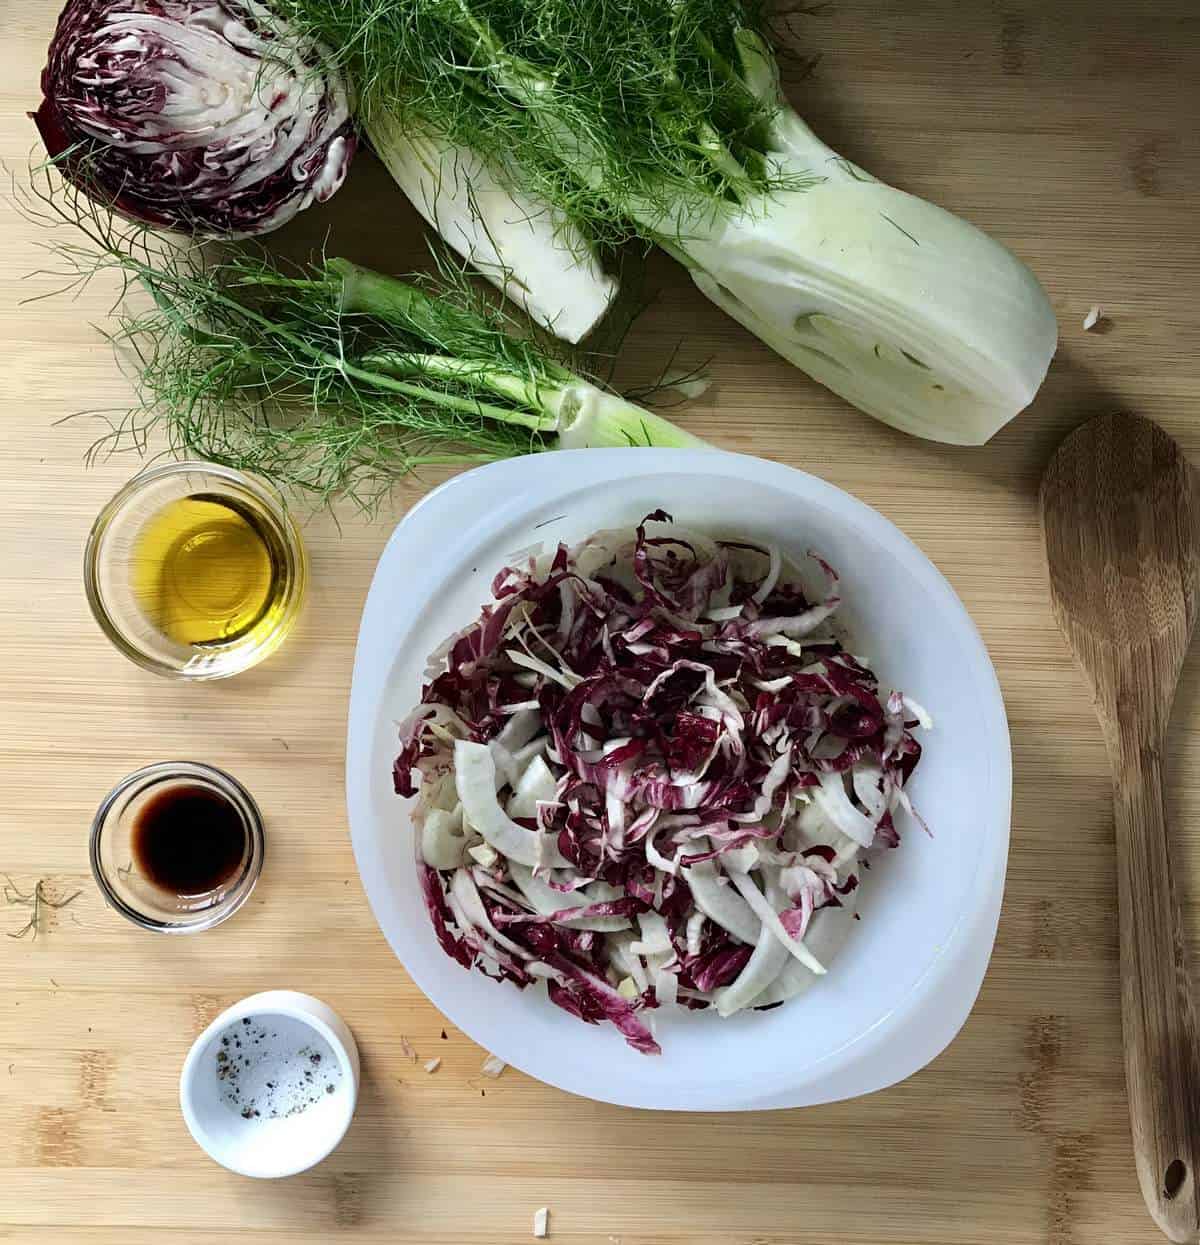 Thinly sliced endive, radicchio and fennel in a large mixing bowl.